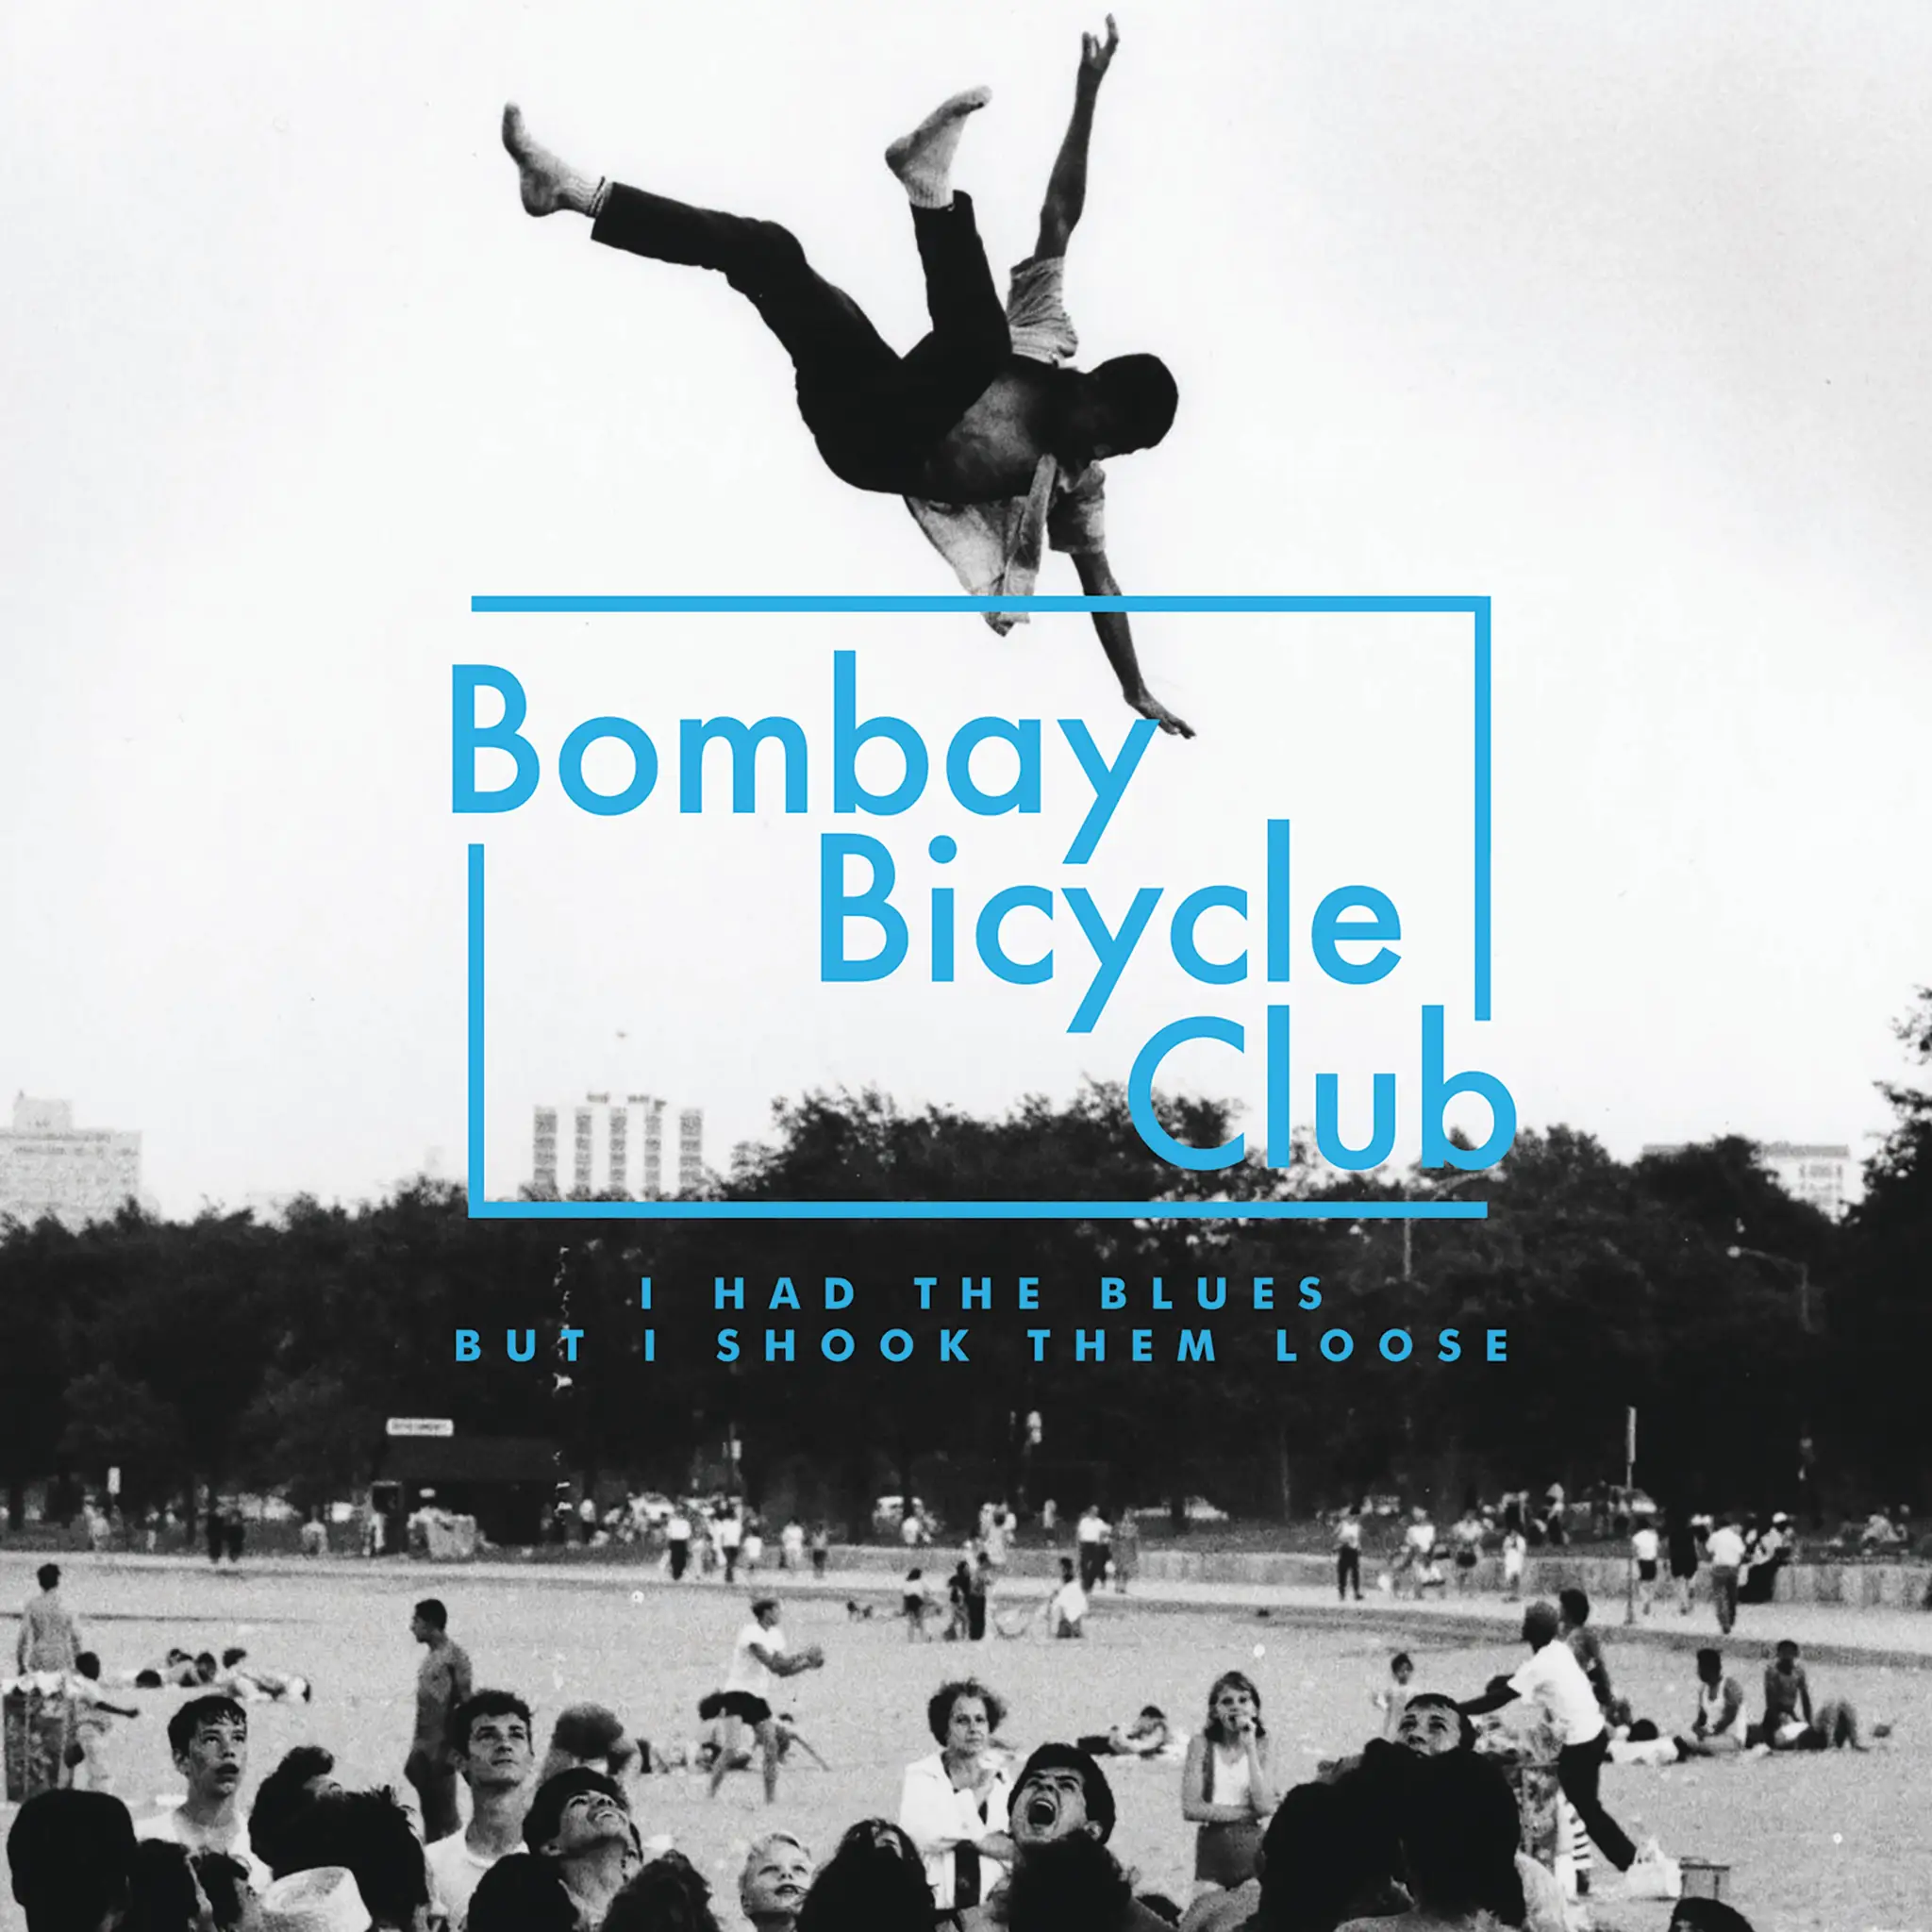 <strong>Bombay Bicycle Club - I Had The Blues But I Shook Them Loose</strong> (Vinyl LP - black)